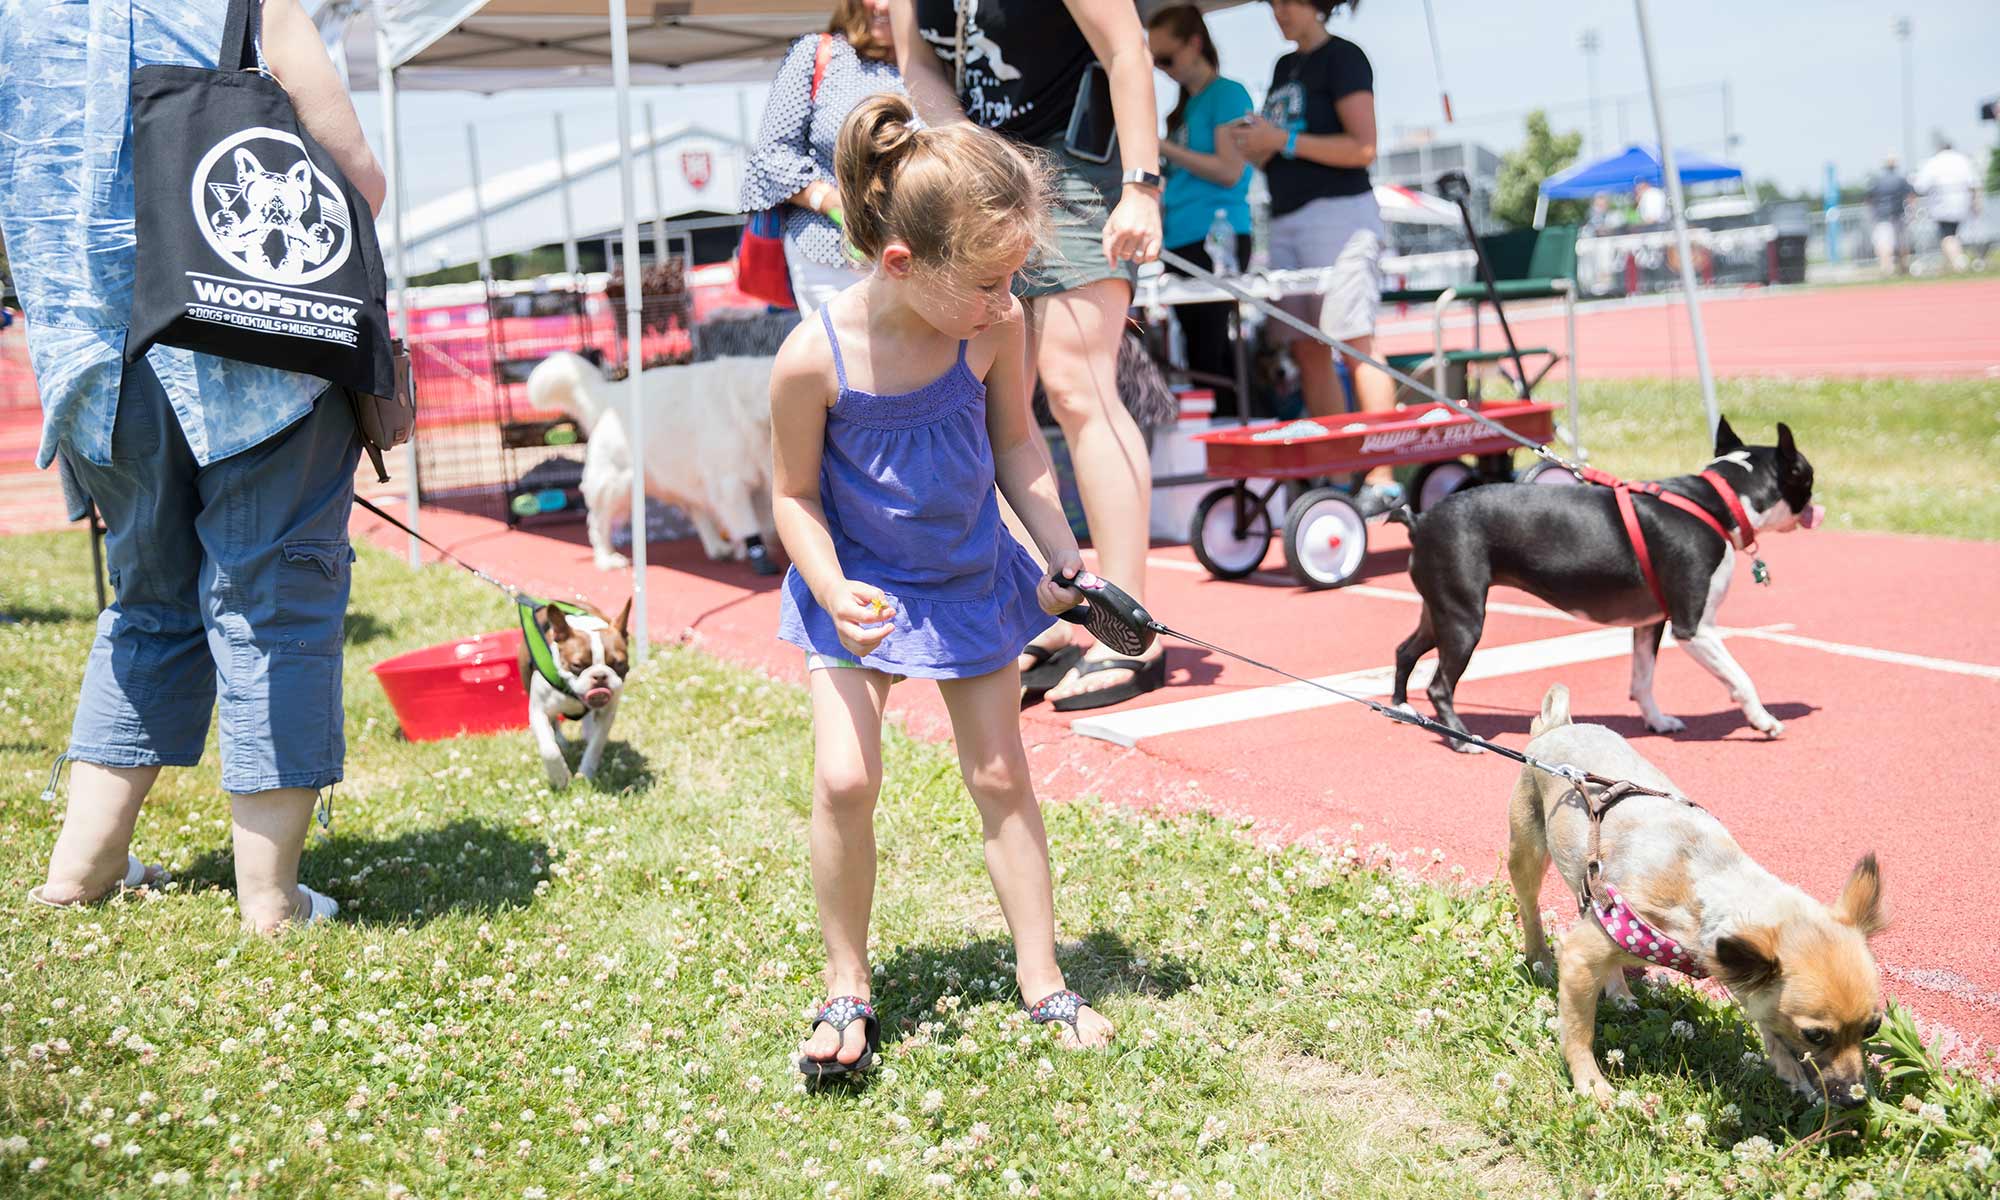 WOOFstock event photography showing child walking a dog on leash